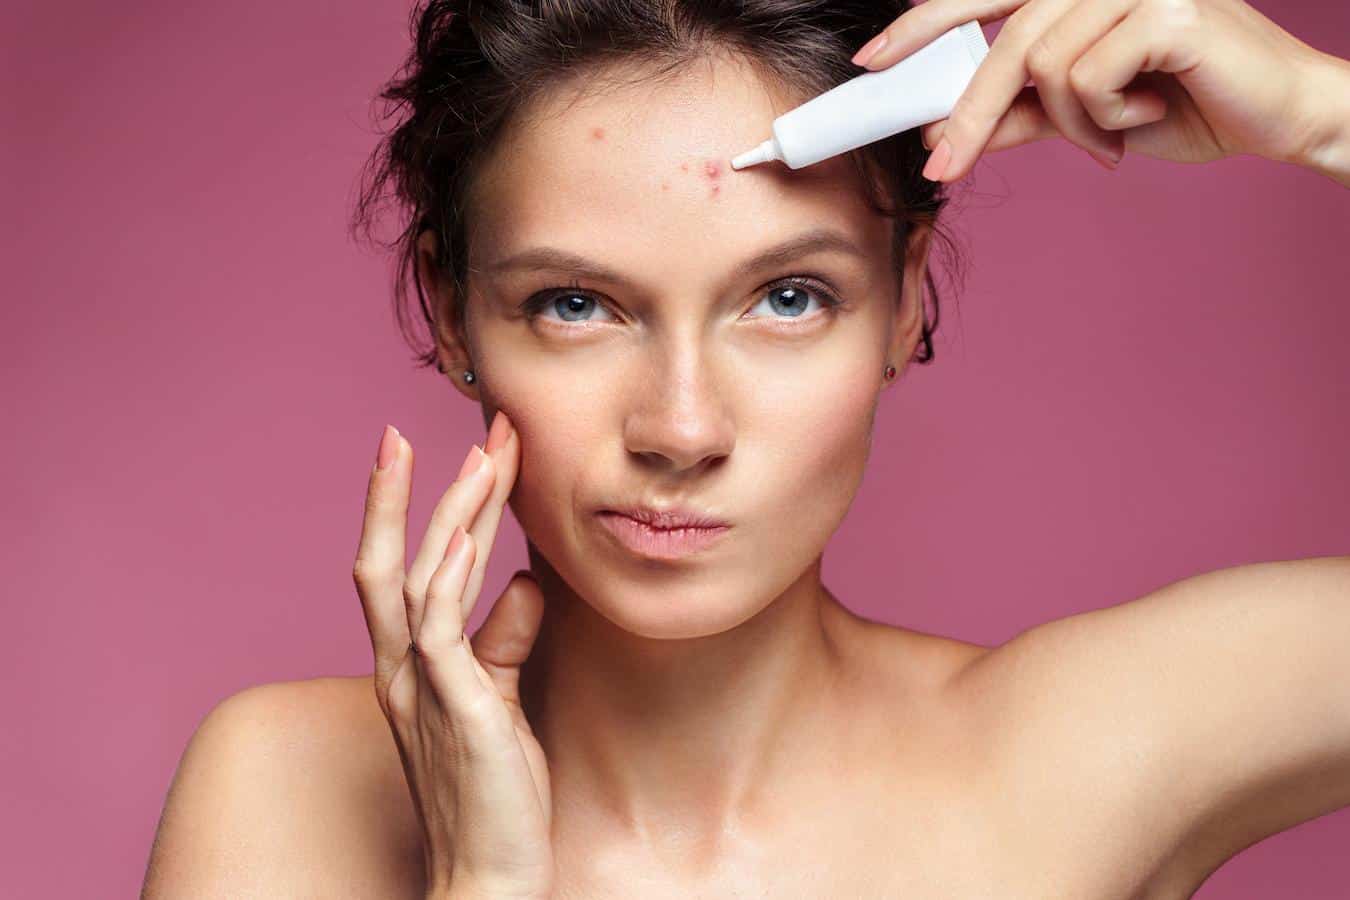 How To Reduce Pimples On Dry Skin